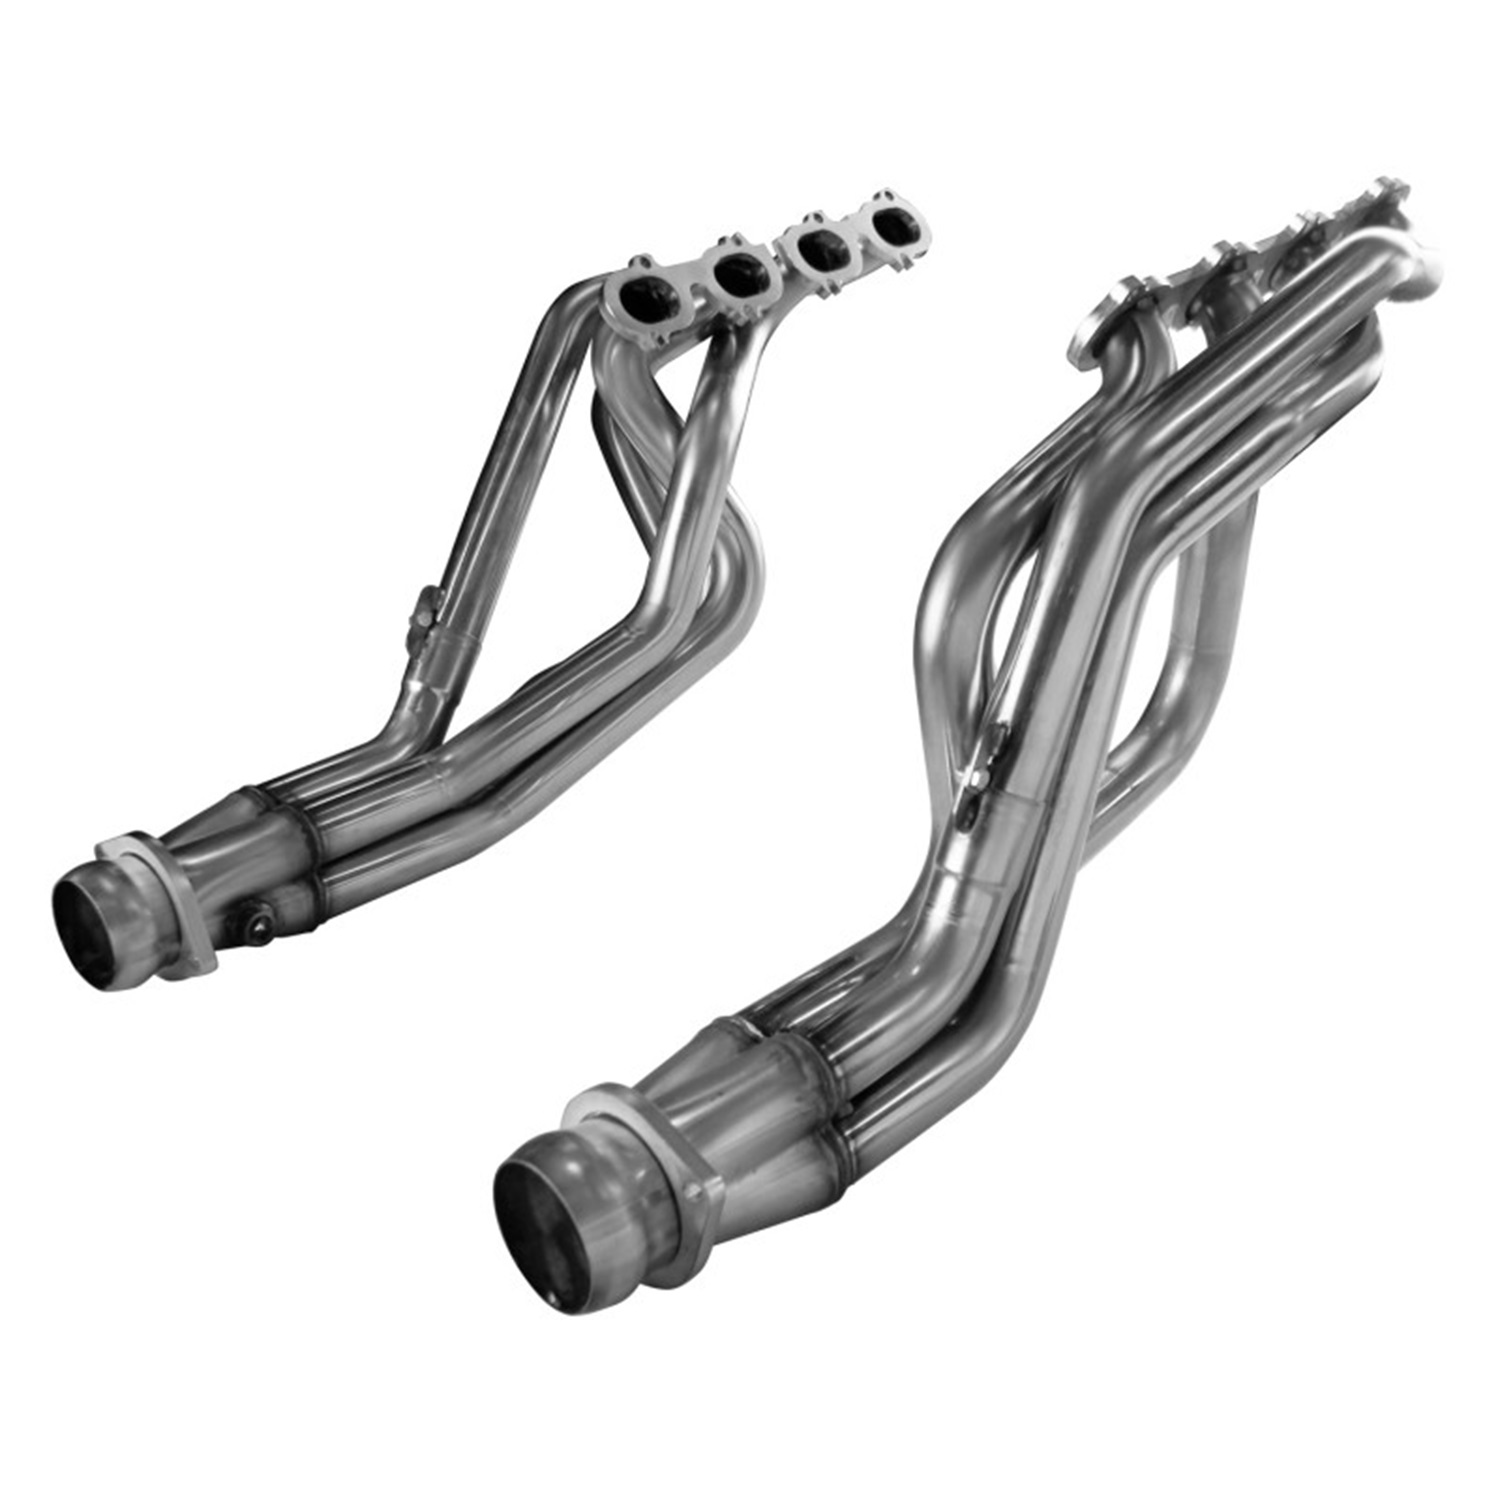 Stainless Steel Headers 1.75 x 3" Long Tube Incl. 1 Pr. 24" O2 Sensor Extension Harness No EGR